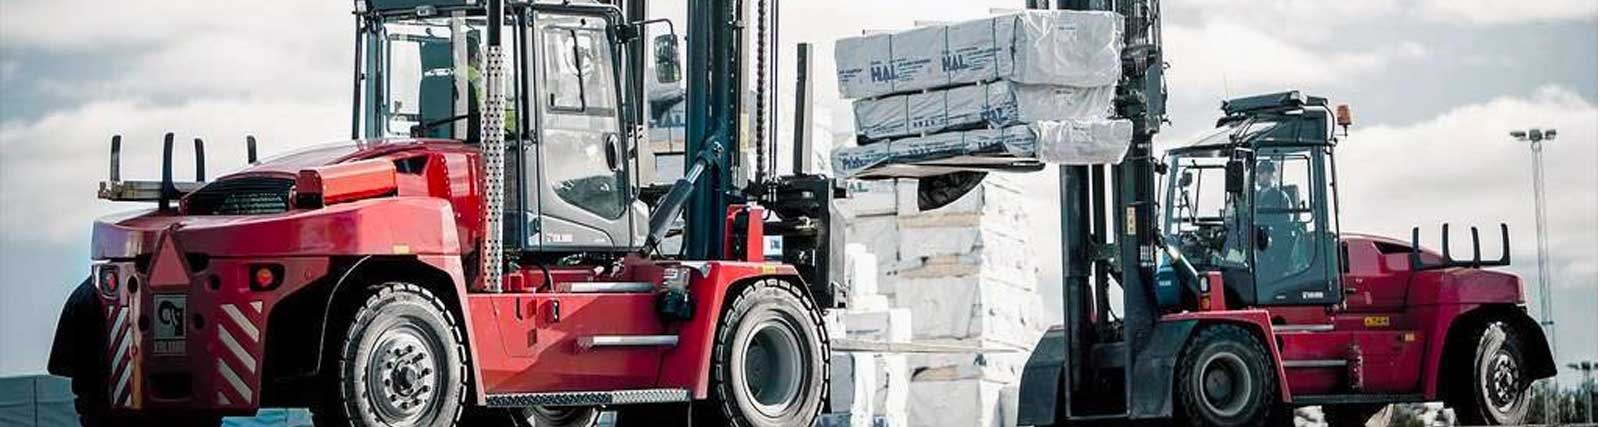 Two kalmar forklifts with heavy loads